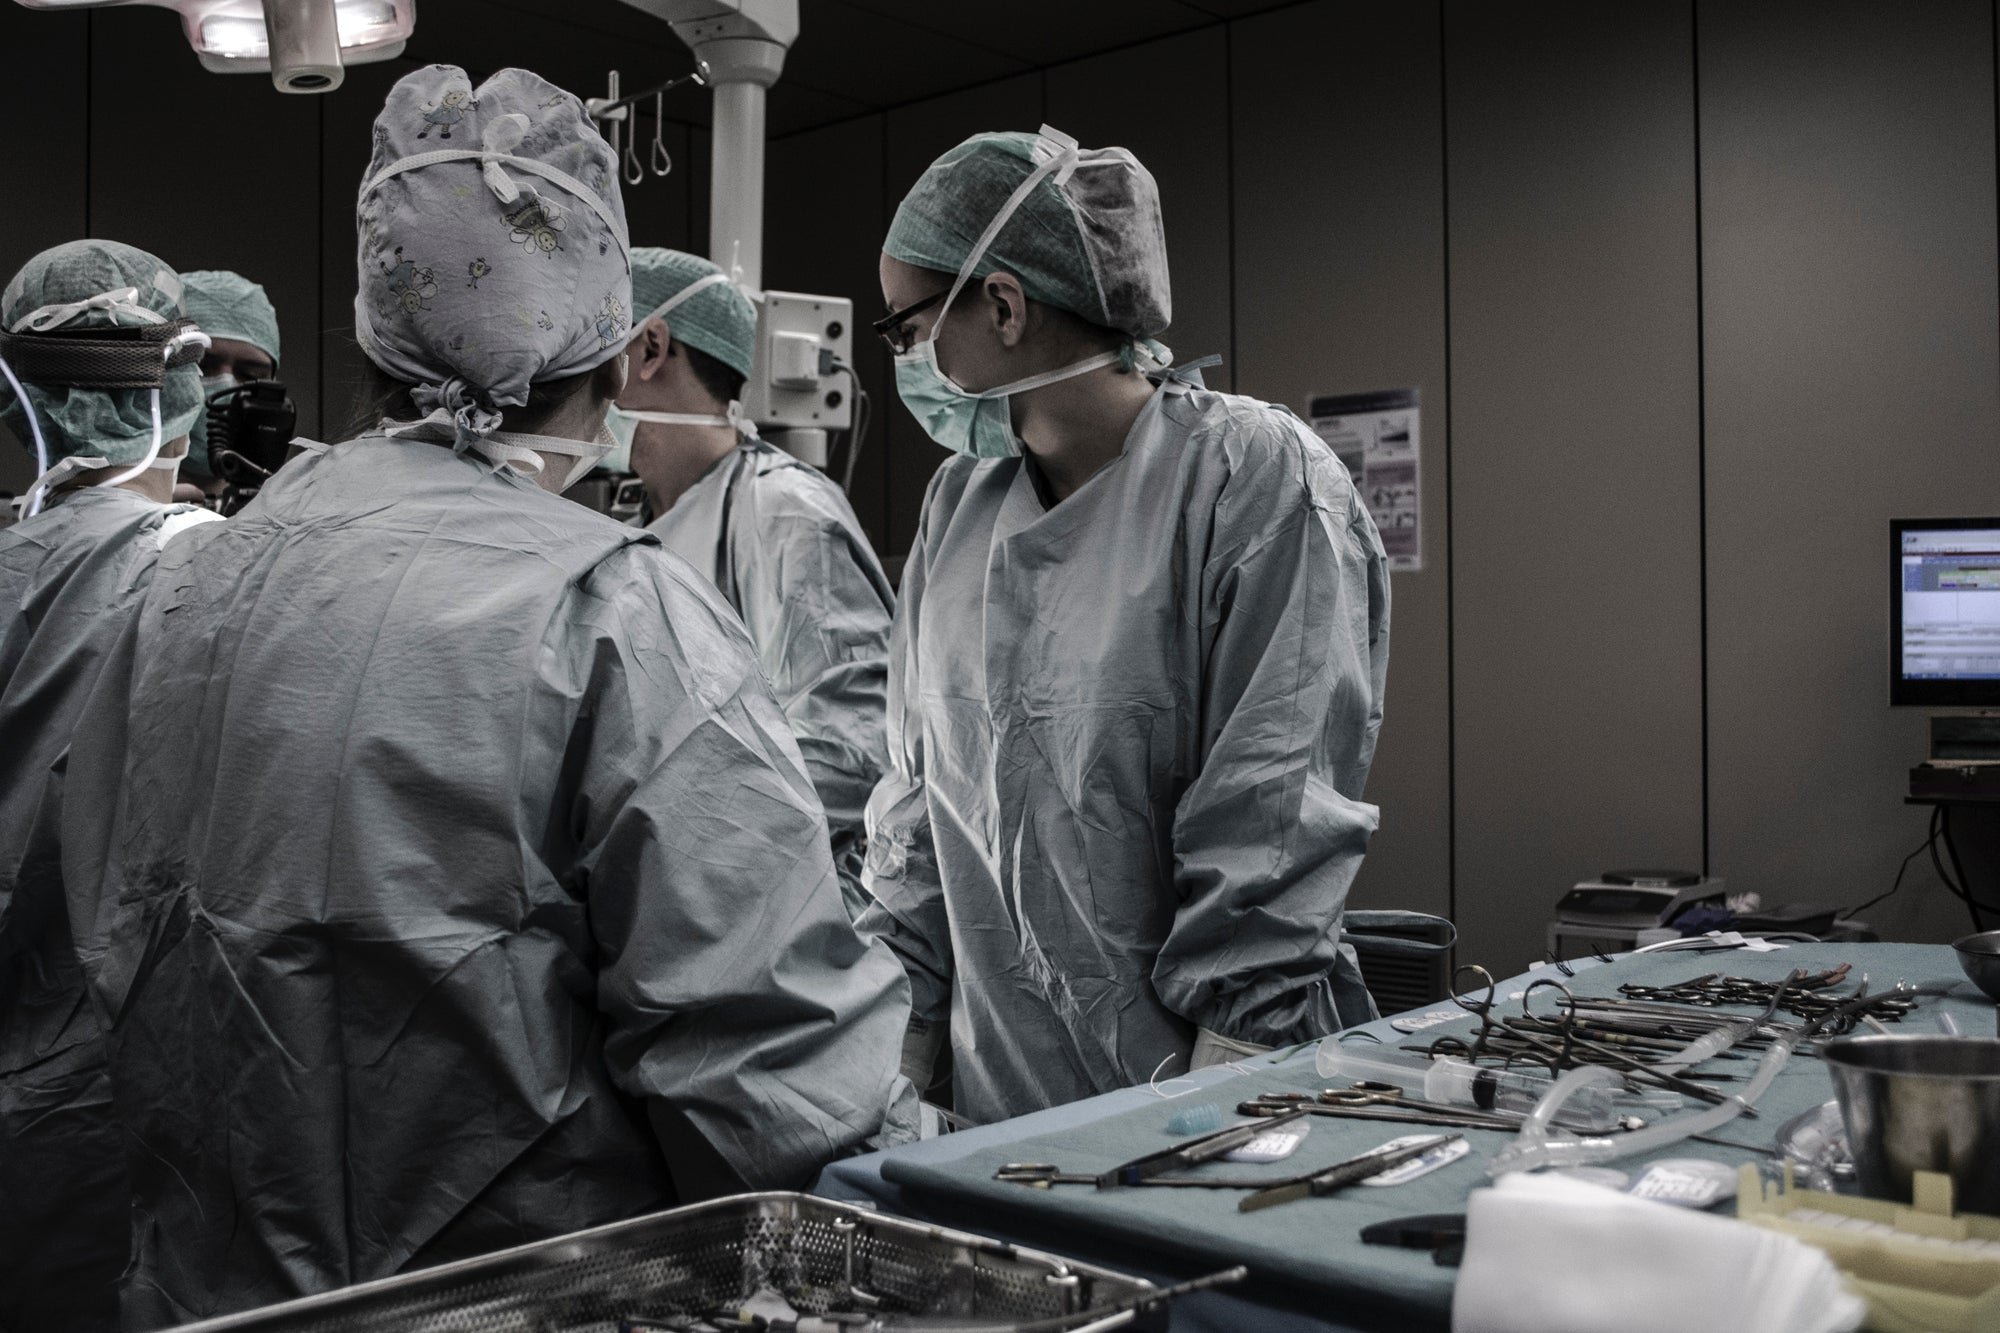 A team of medical professionals overseeing a surgery